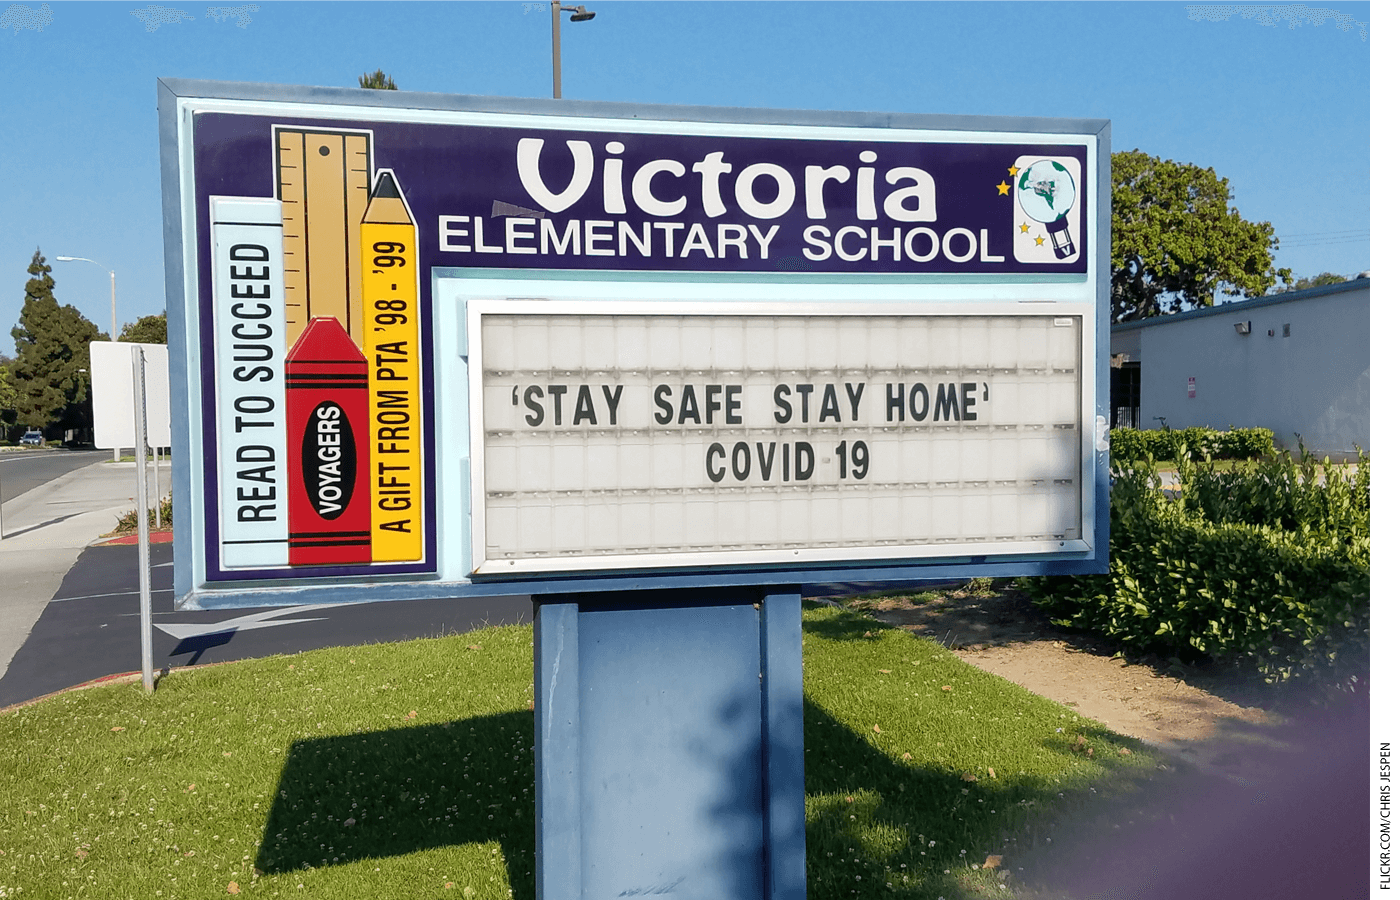 School sign which reads "Stay Safe Stay Home Covid 19"